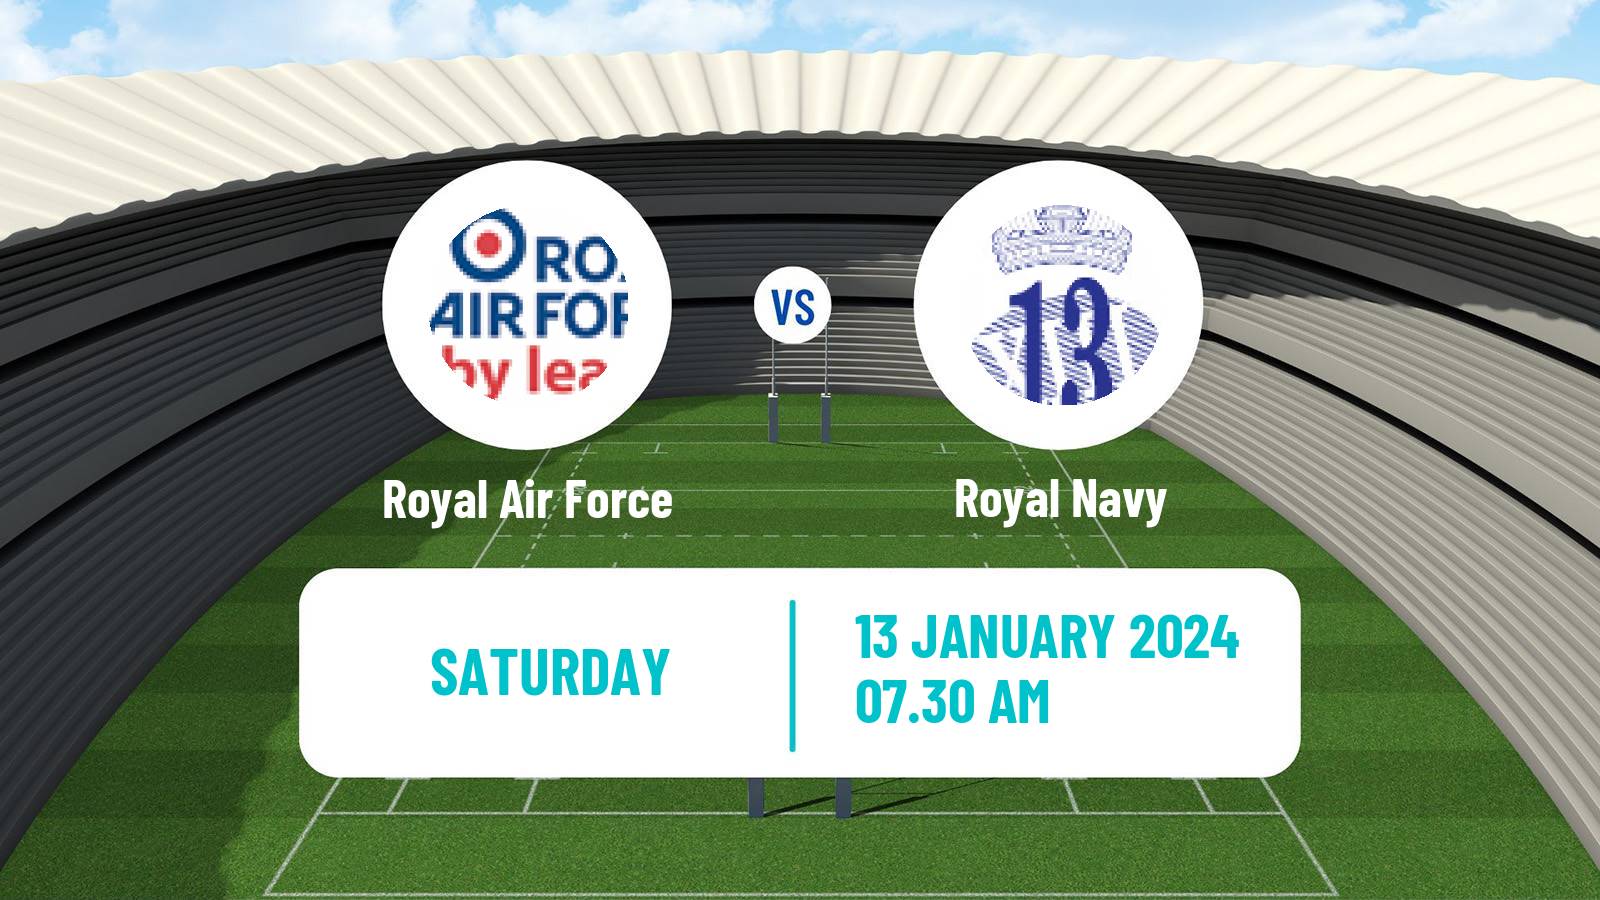 Rugby league Challenge Cup Rugby League Royal Air Force - Royal Navy